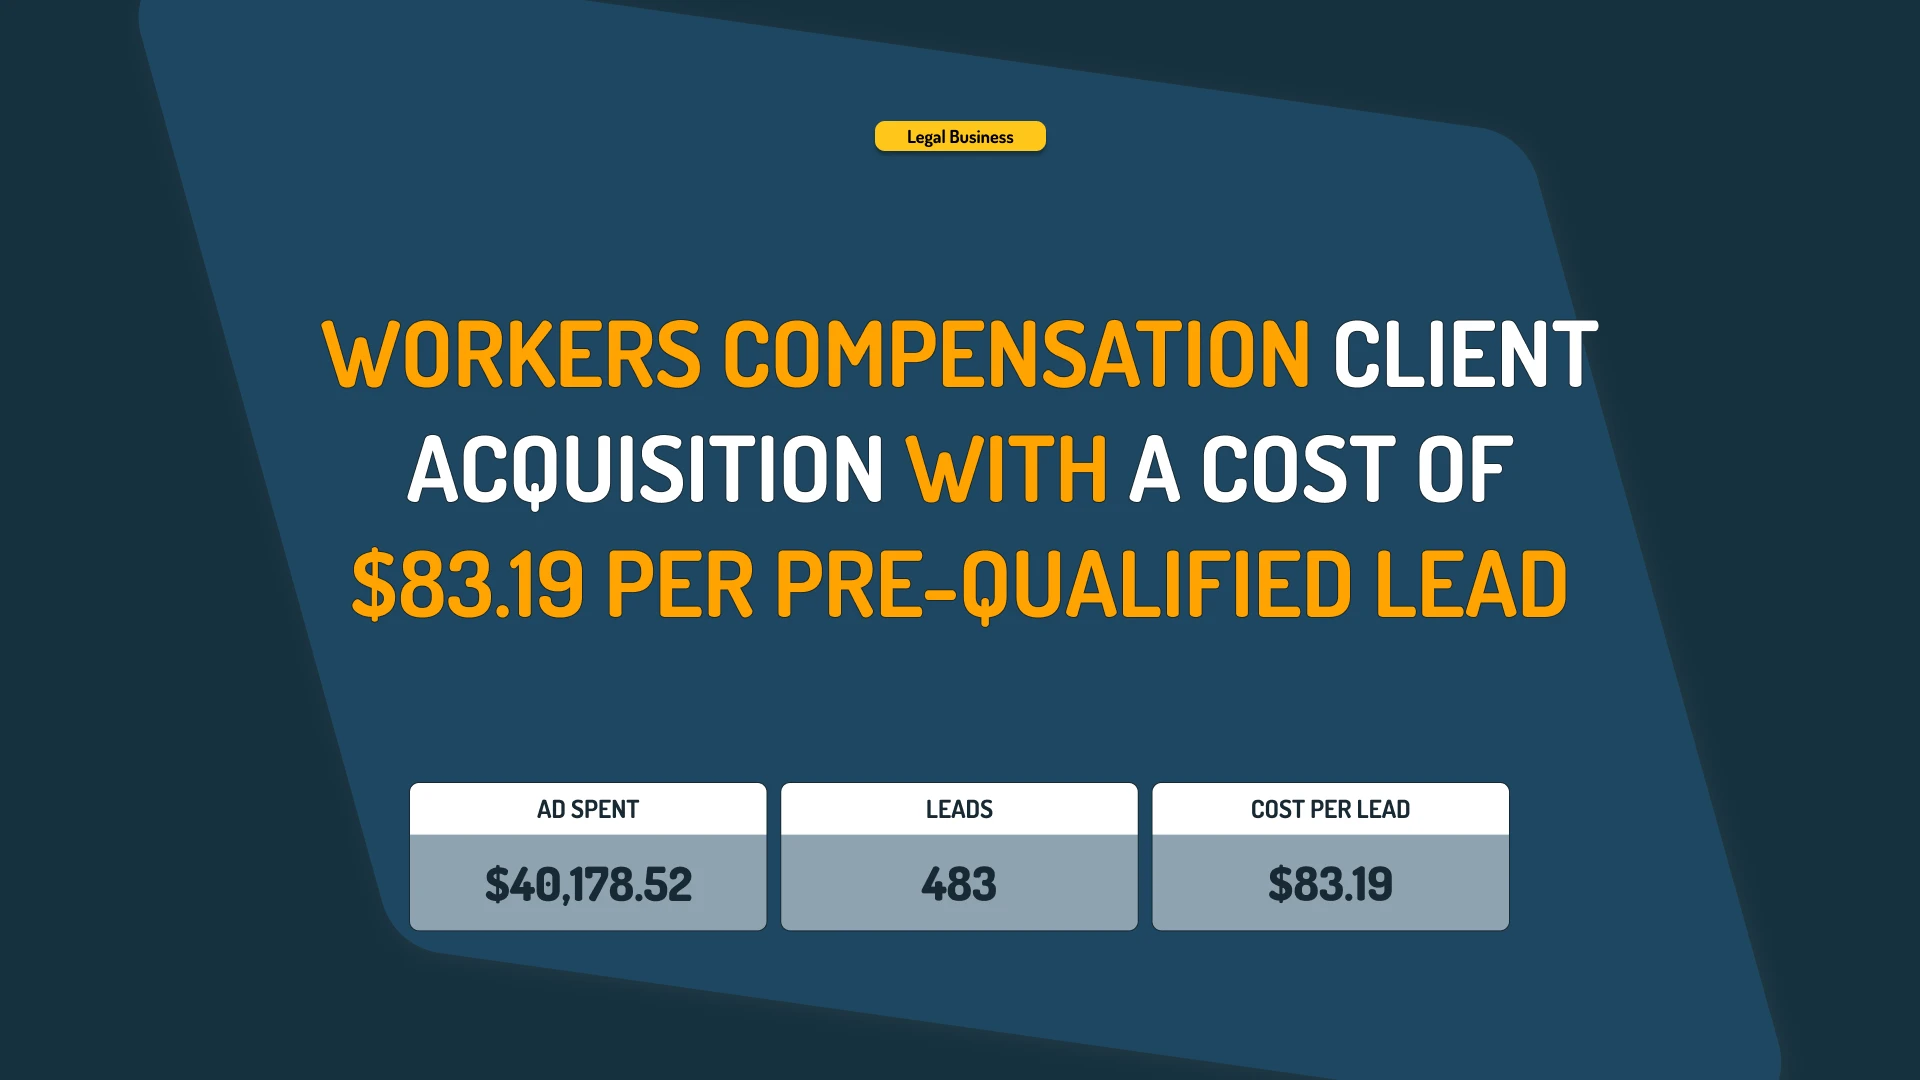 Workers Compensation: client acquisition with a cost of $83 per lead